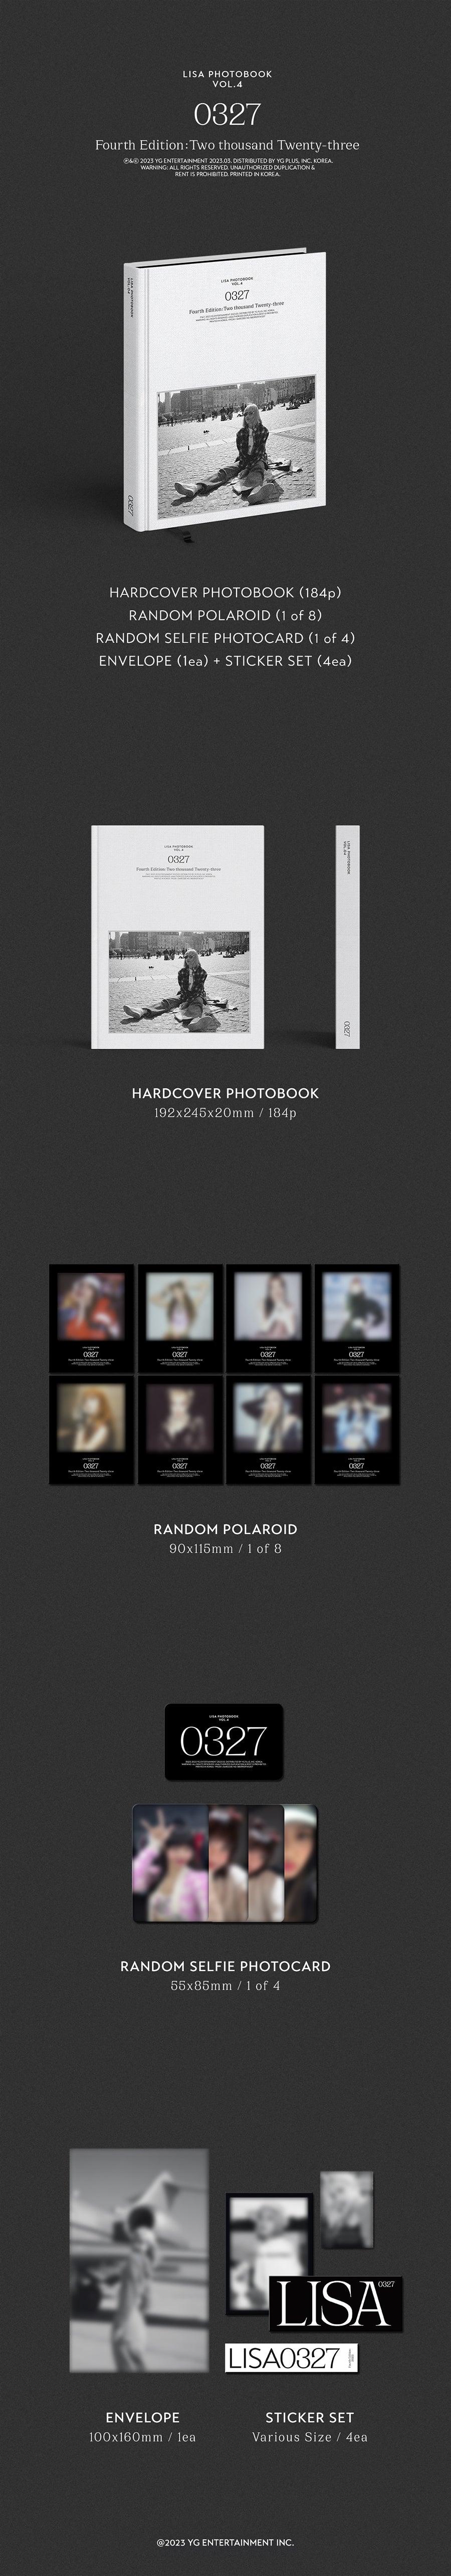 UK Free Tracked Shipping for LISA 0327 PHOTOBOOK VOL. 4 with pre-order benefit POB special gift photocard. Buy from a huge collection of official merch at the best online kpop store marketplace in Manchester UK Europe. Buy BLACKPINK BTS BT21 & Stray Kids at our k-pop shop. JISOO FIRST SINGLE ALBUM for sale.